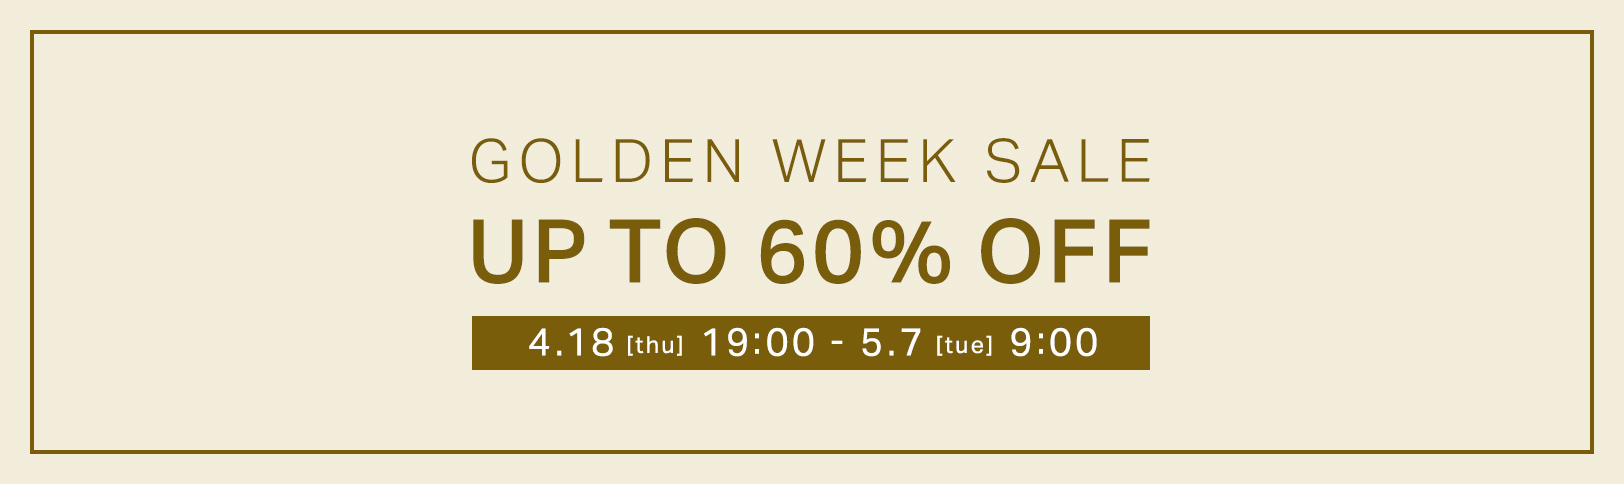 SUMMER SALE UP TO 60% OFF 8/10[thu]18:00 - 8/21[mon]9:00